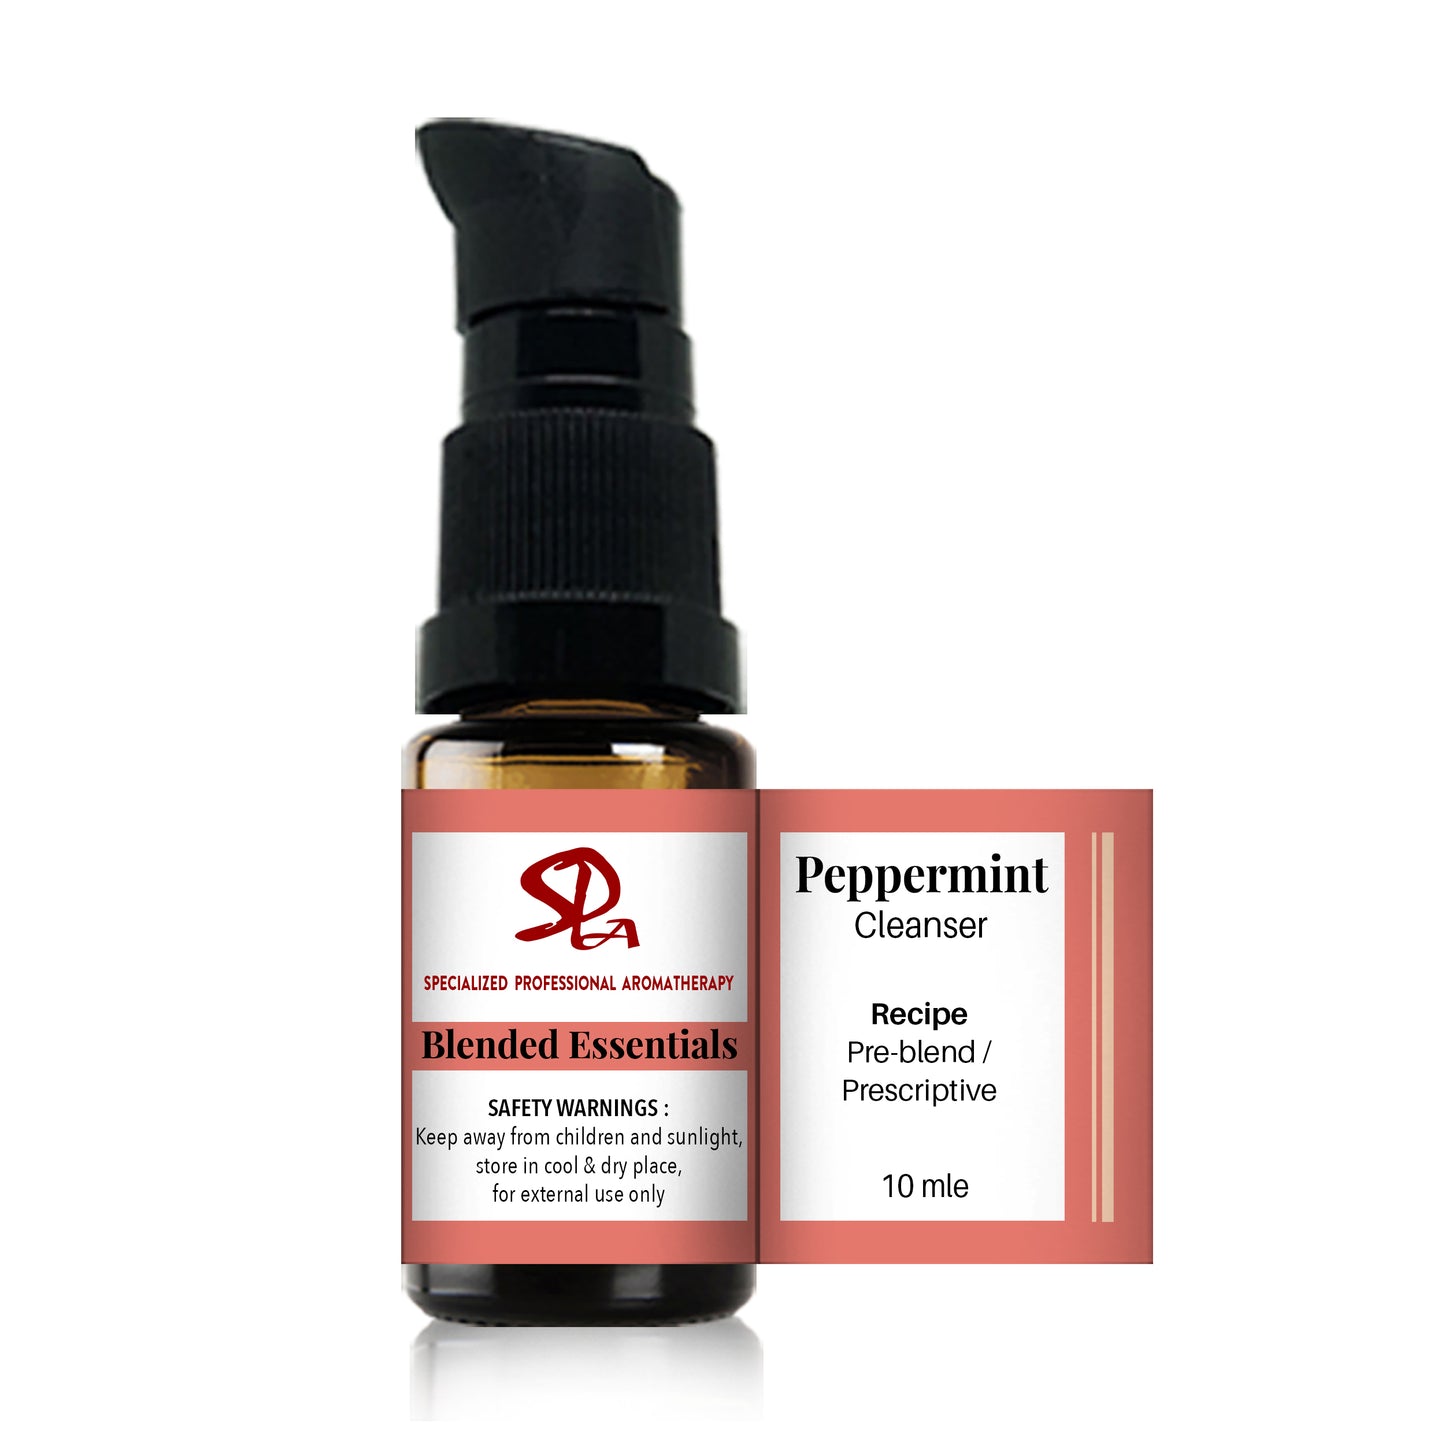 Peppermint Cleanser